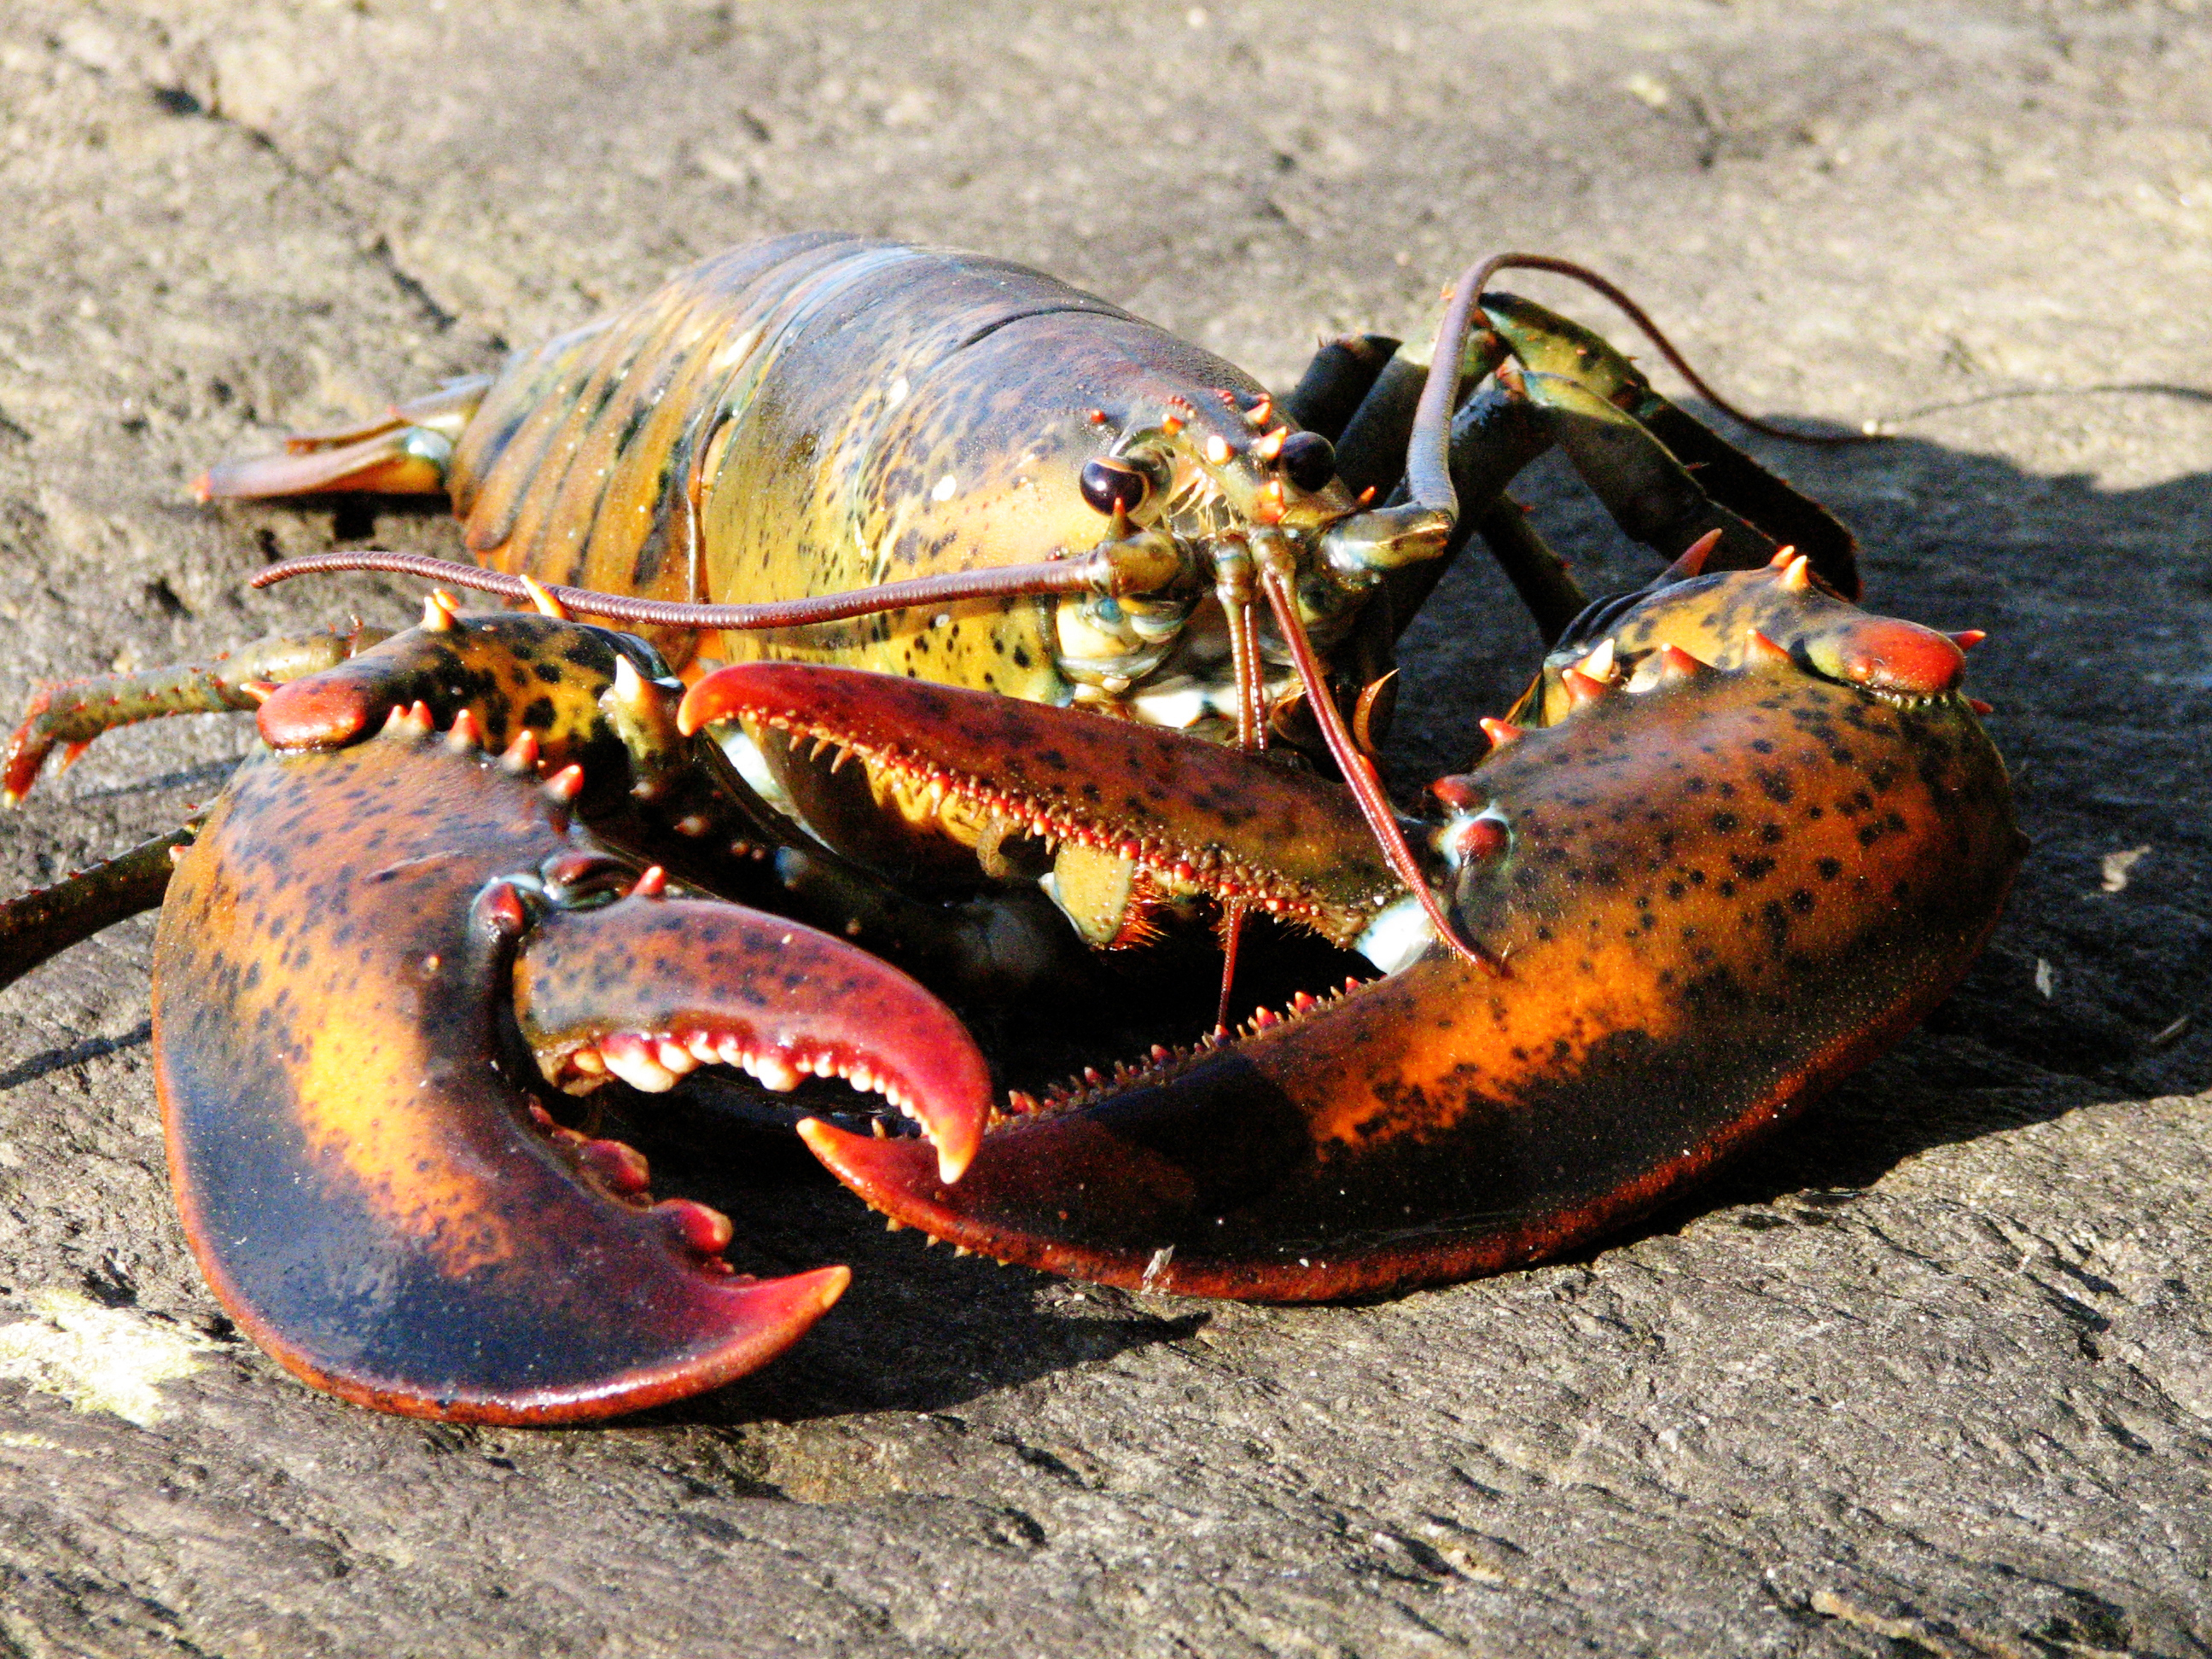 Will HSUS Campaign Against Eating Lobster? - HumaneWatch